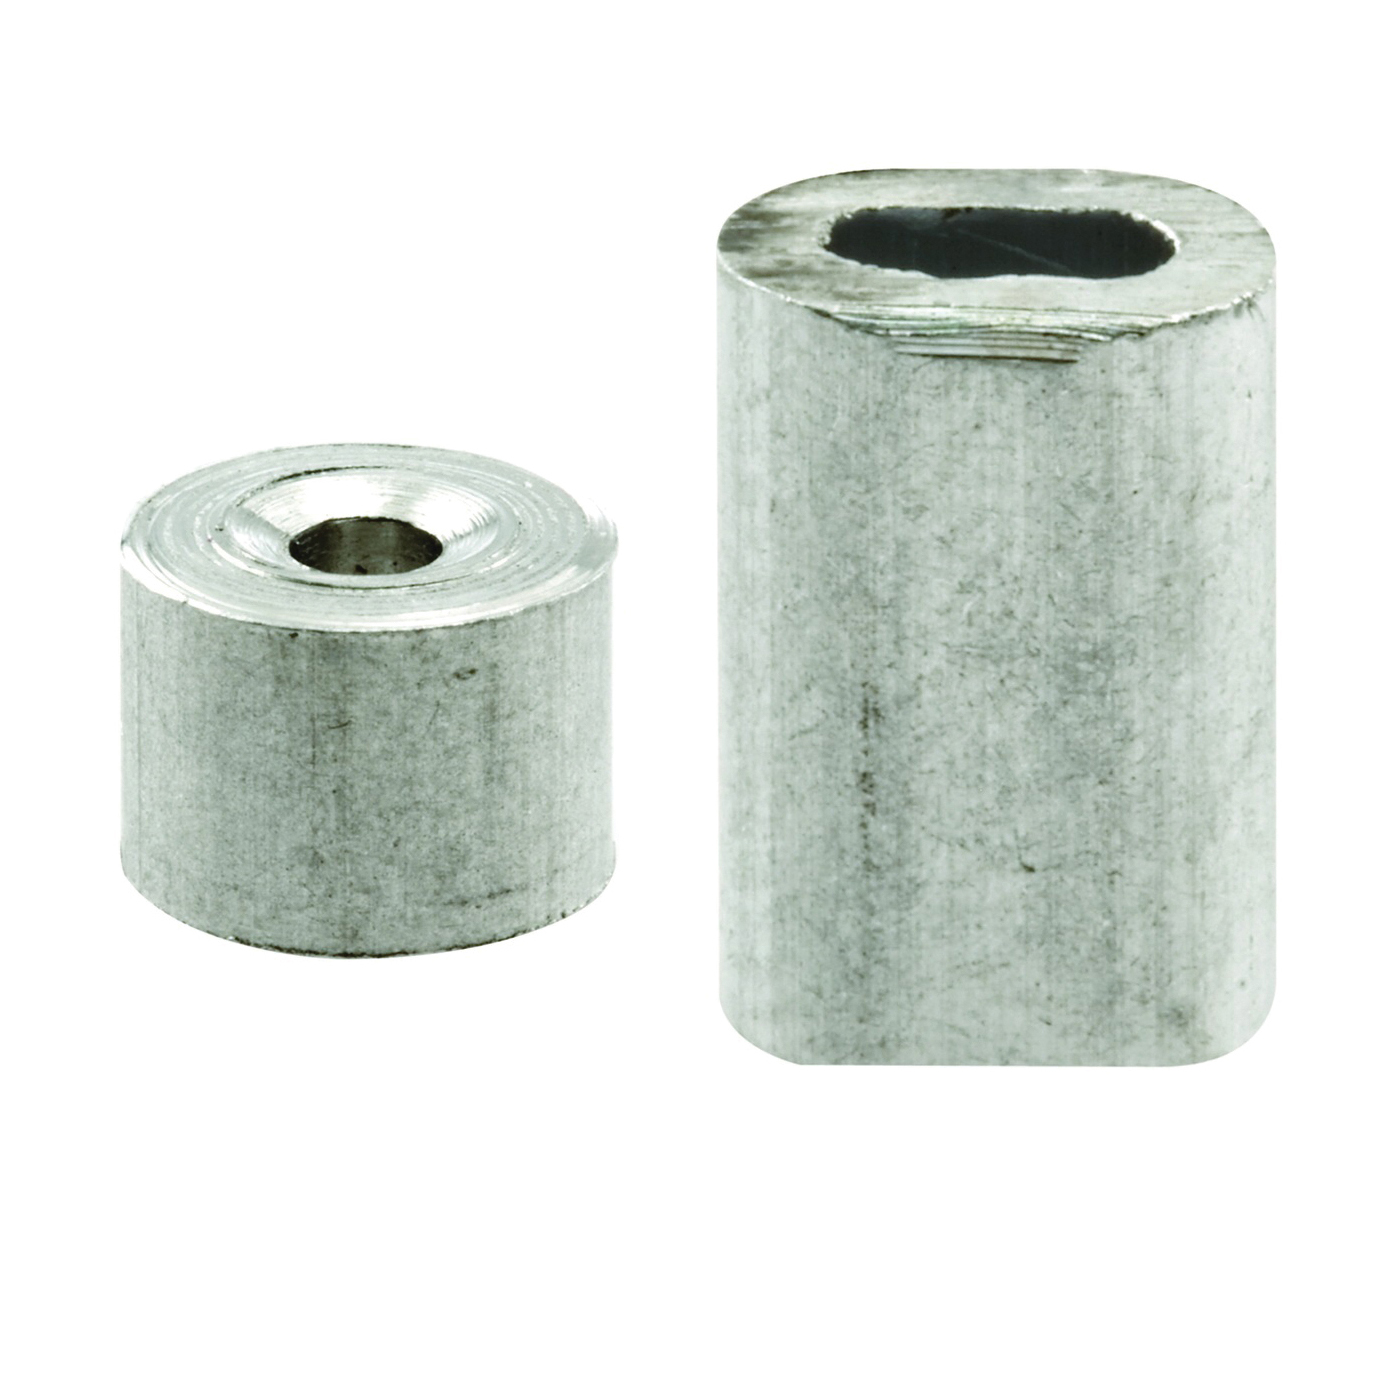 Prime-Line GD 12149 Cable Ferrule and Stop, Aluminum - 1